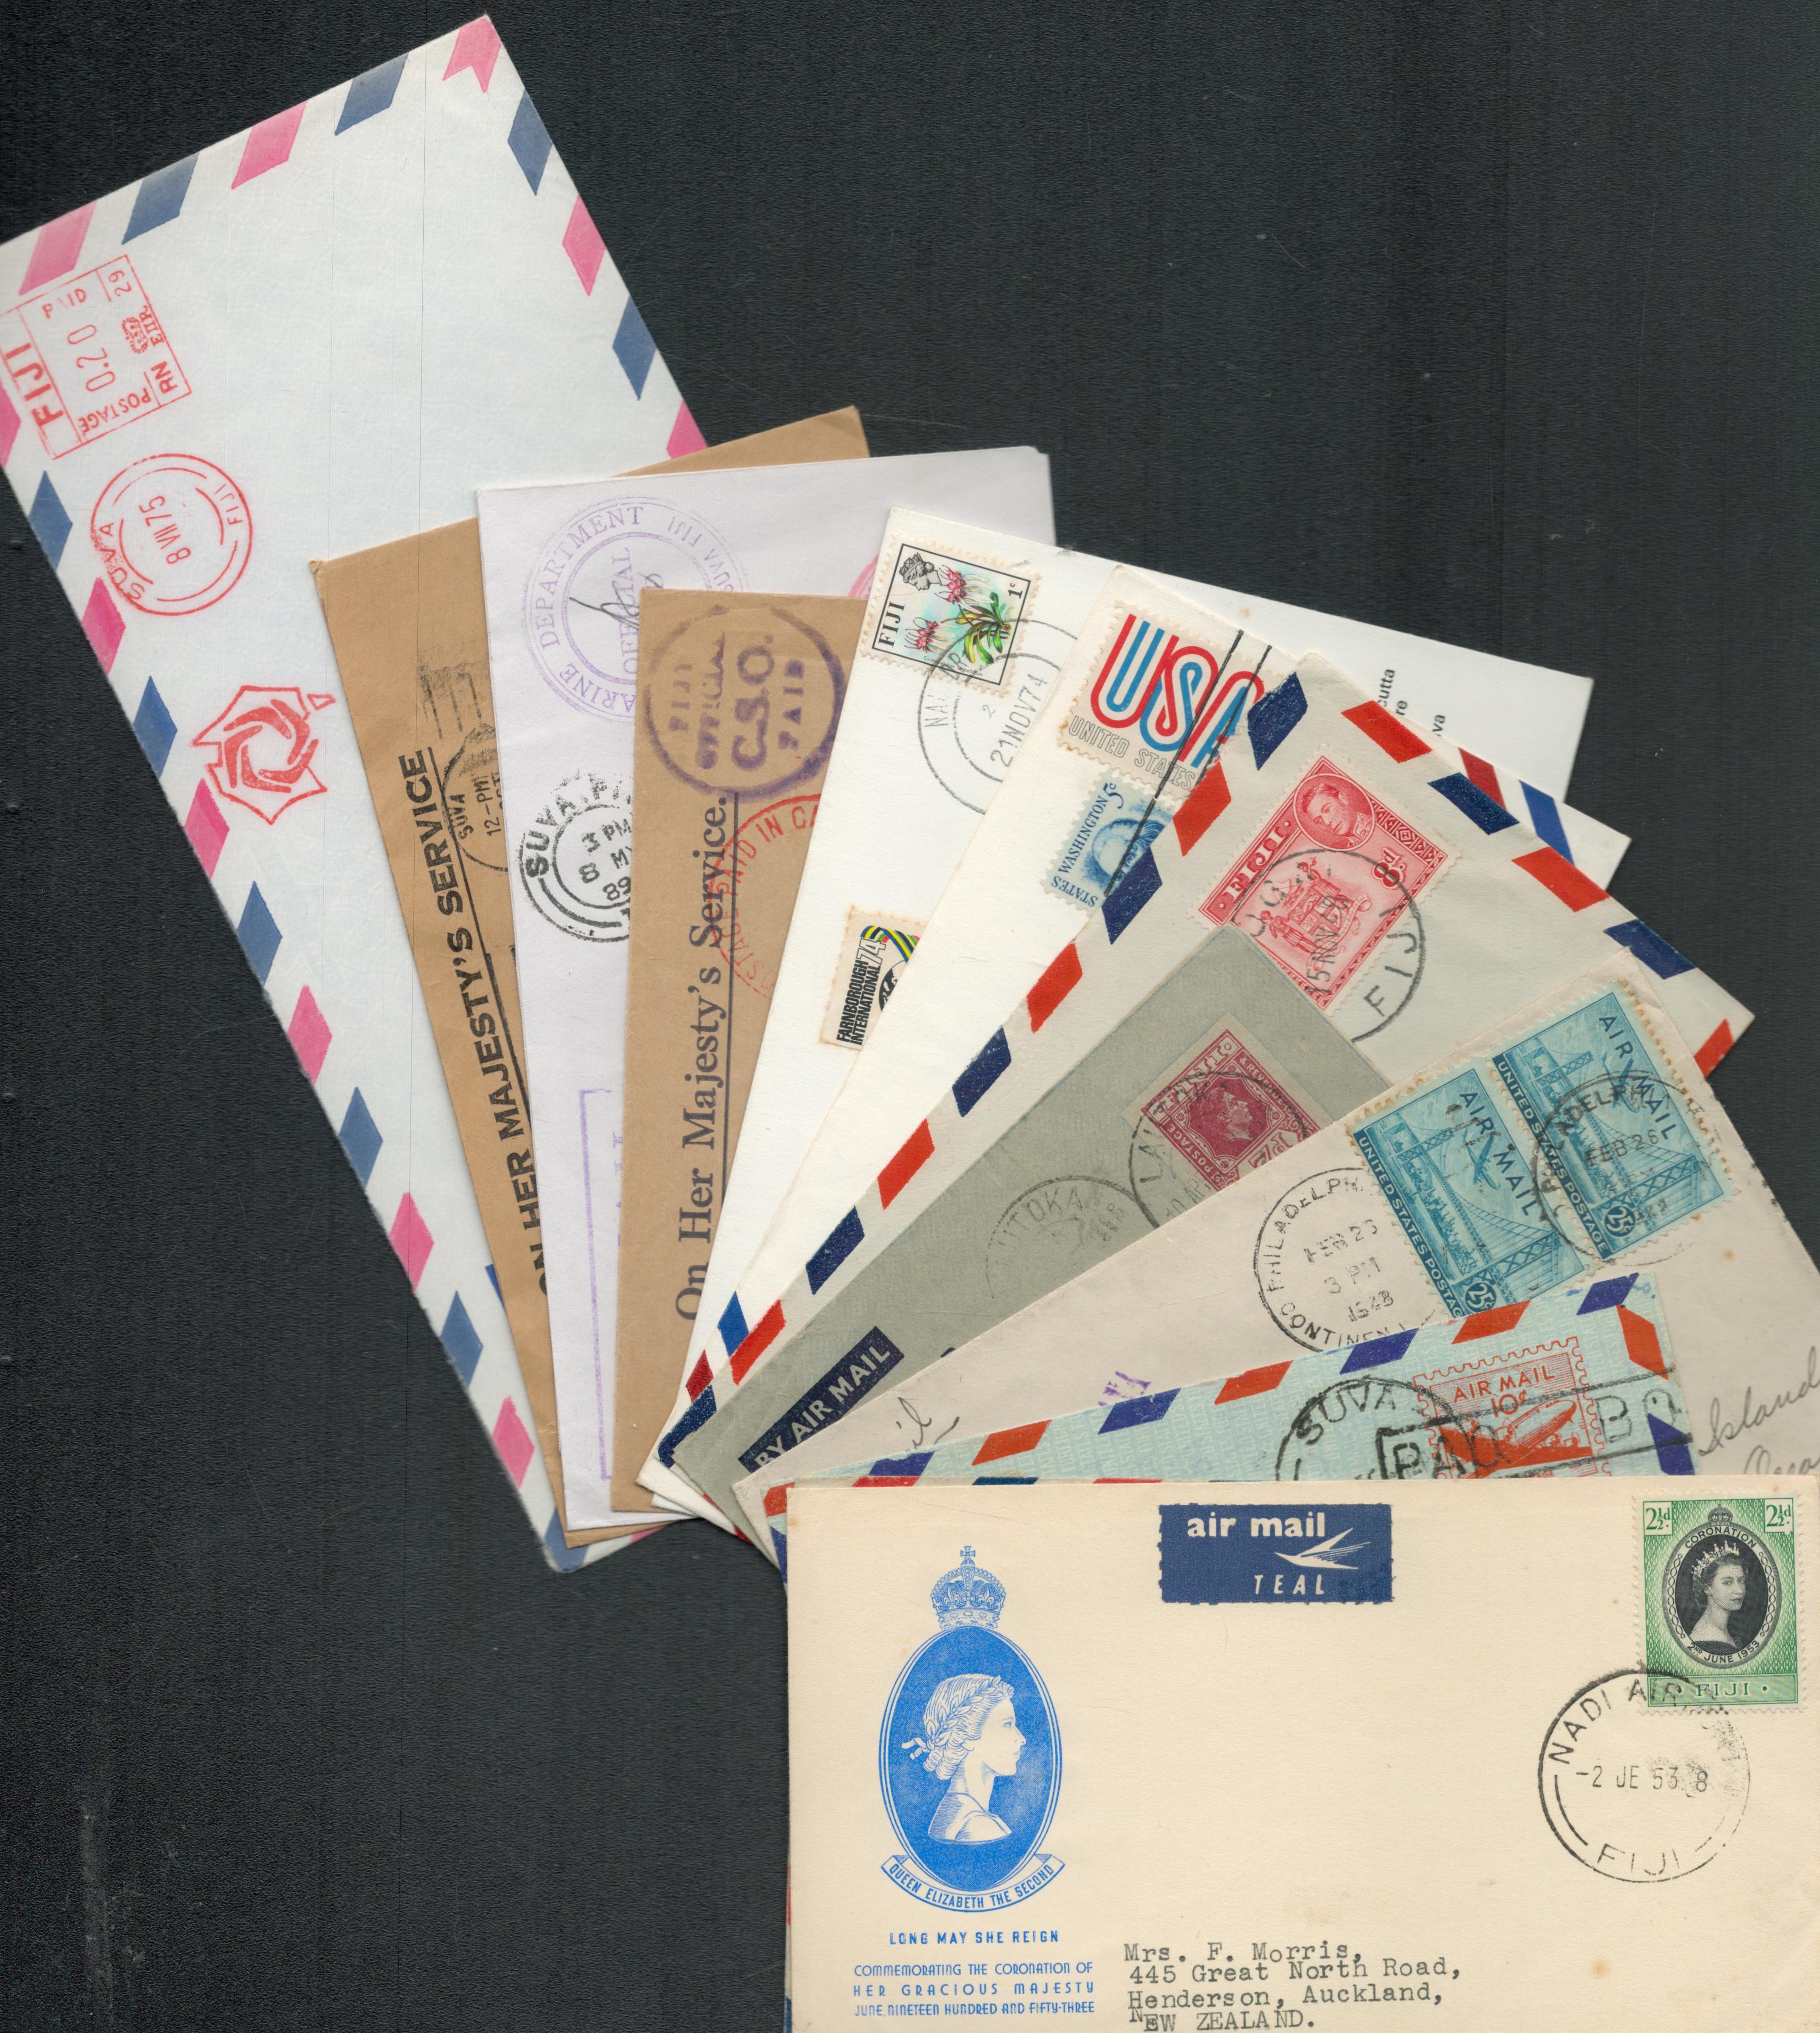 1945 to 1989 Air Mail, first flight collection of 13 covers and Airmail letters. Nice mixture to